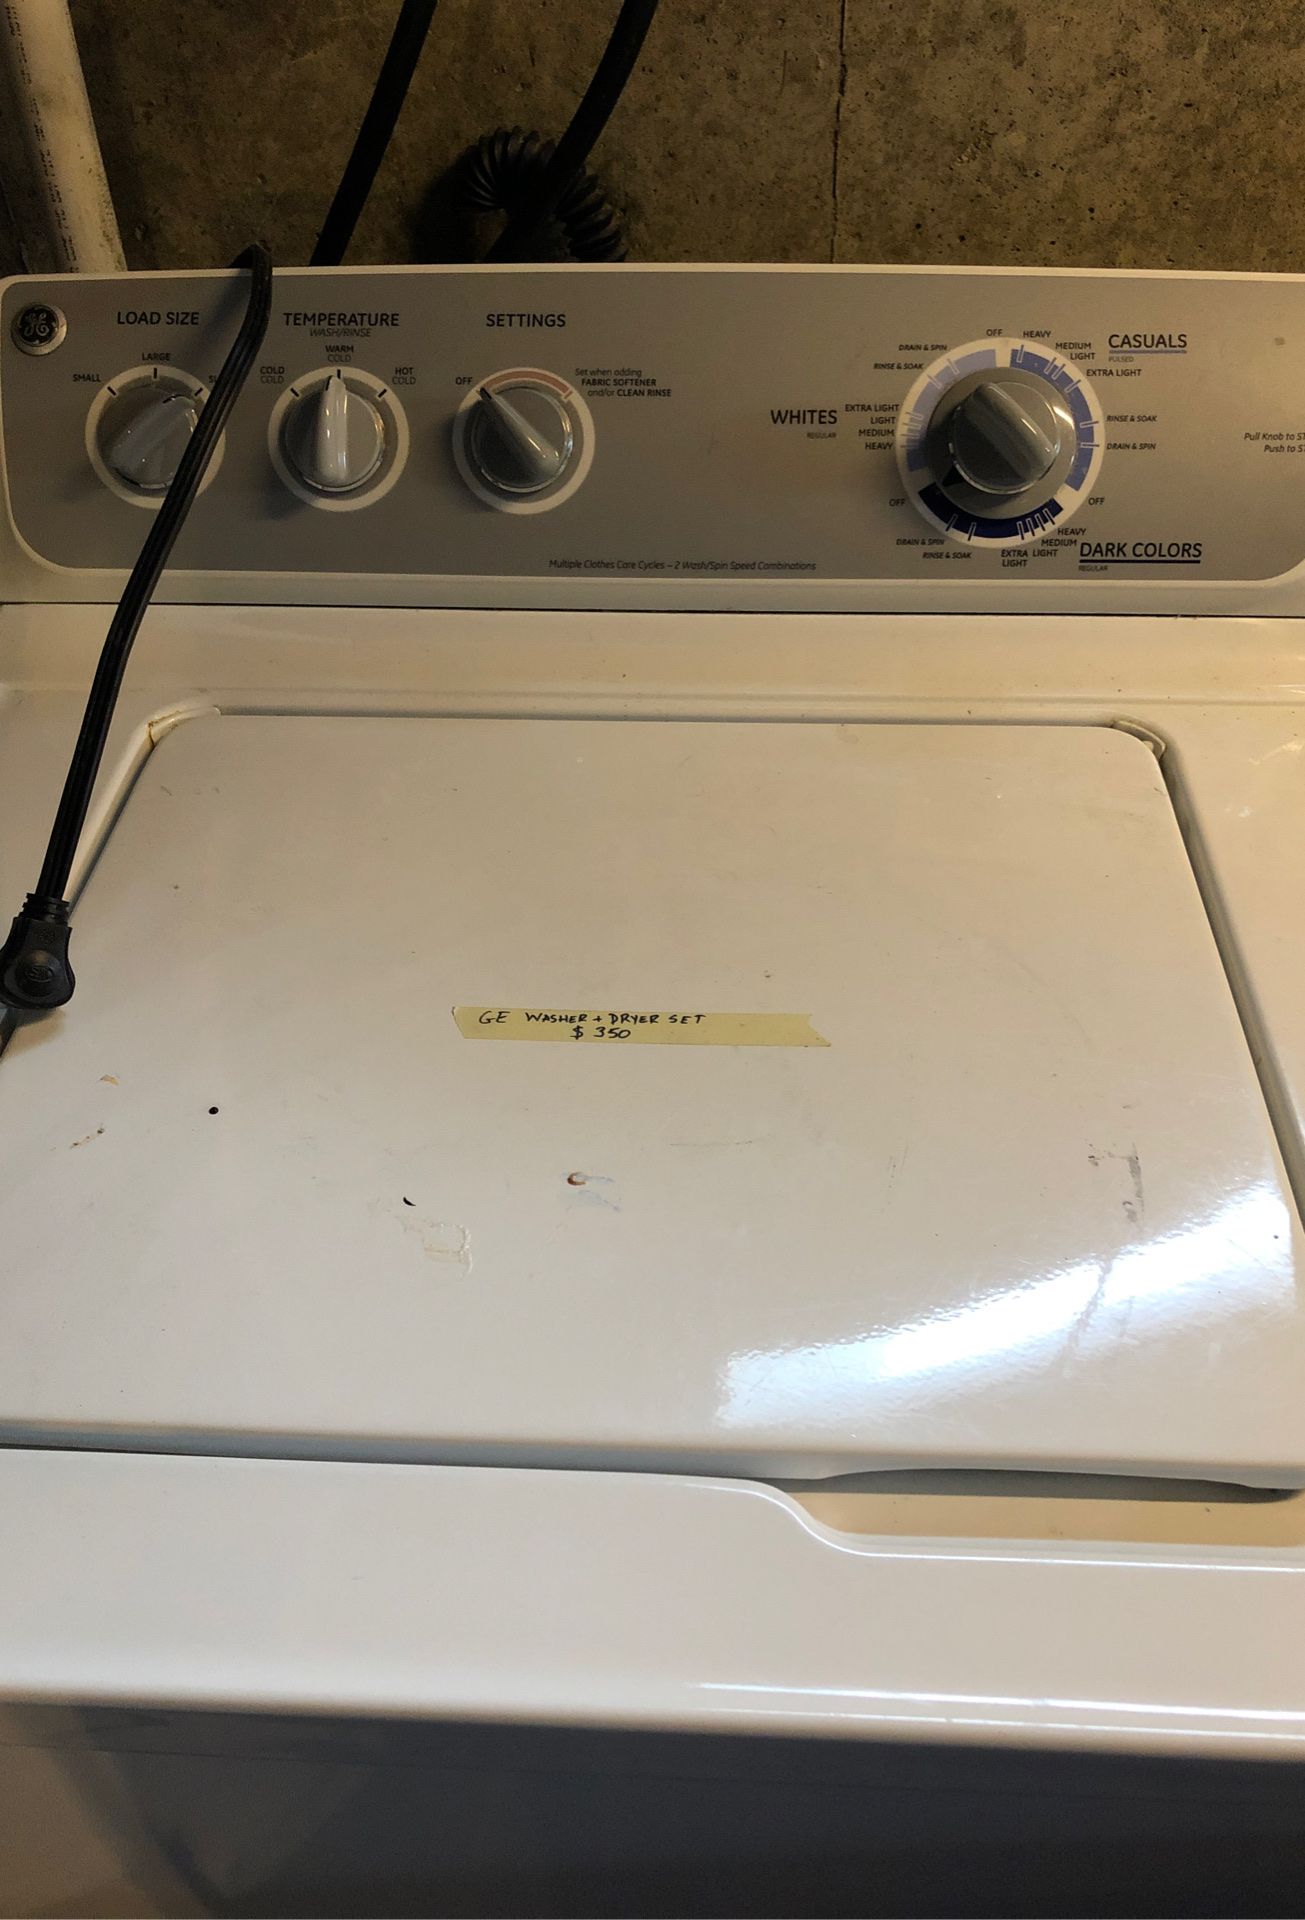 GE washer set two years old